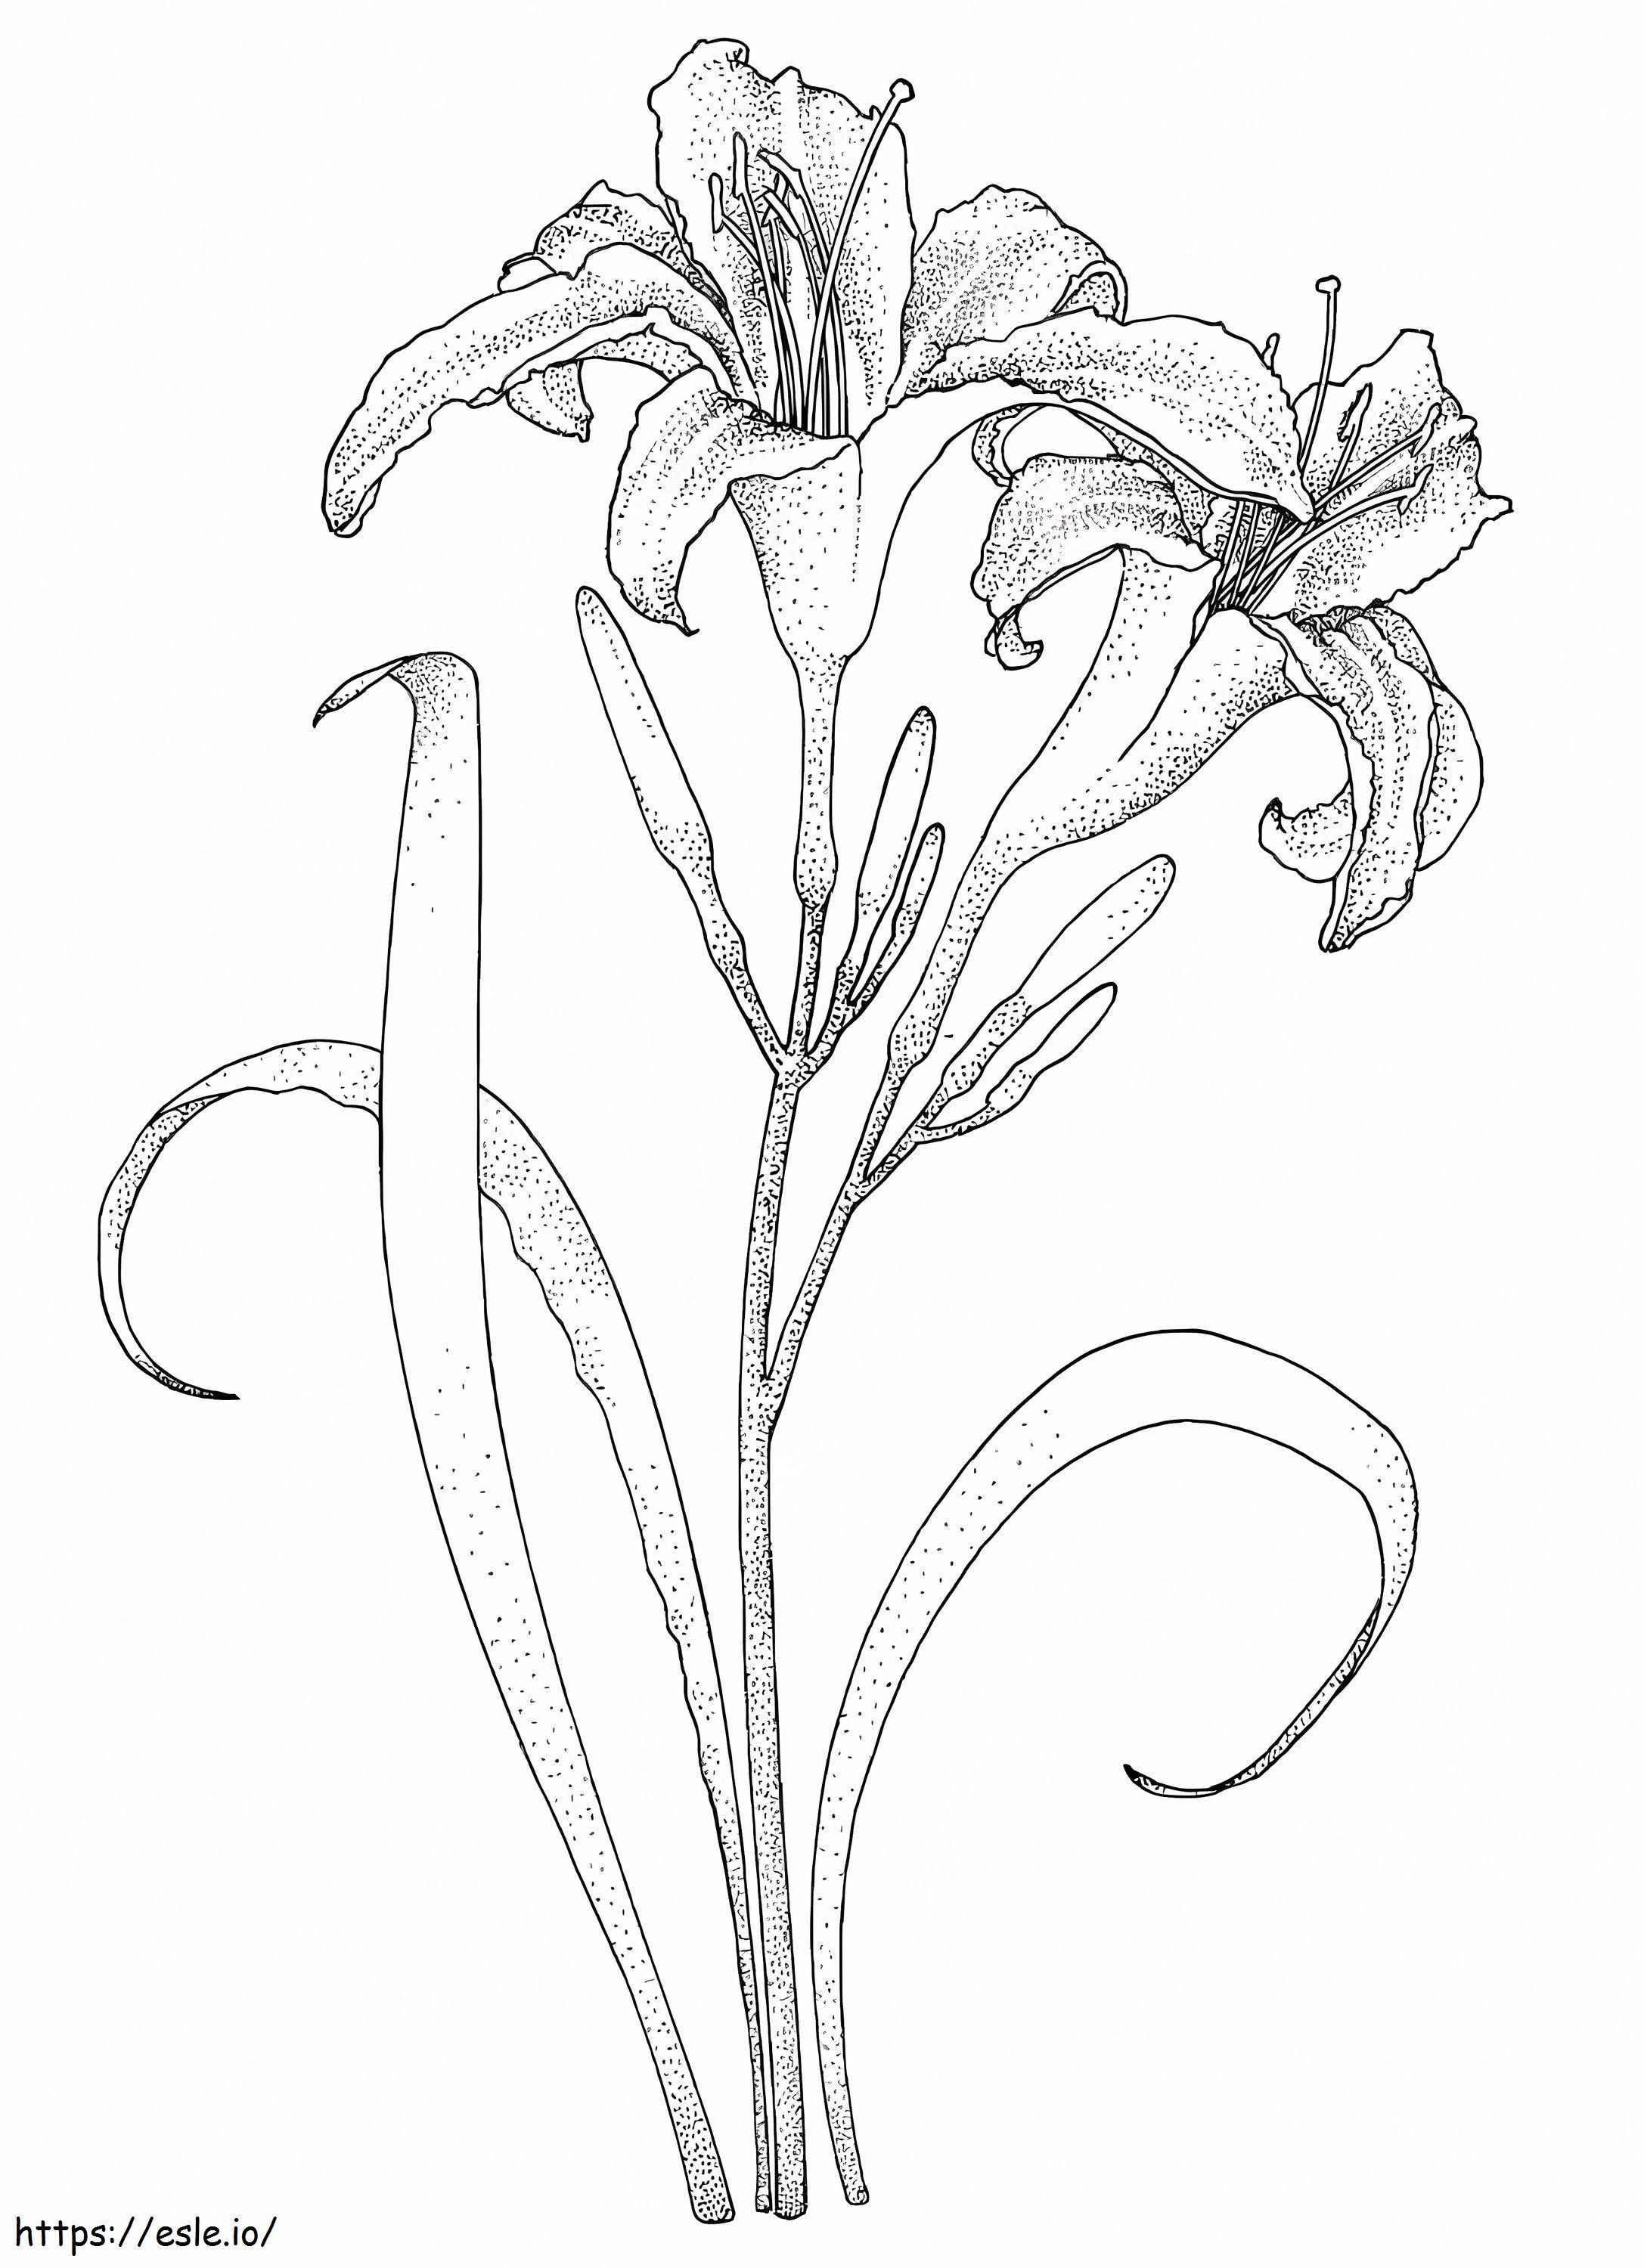 Lily Stem With Two Flowers coloring page